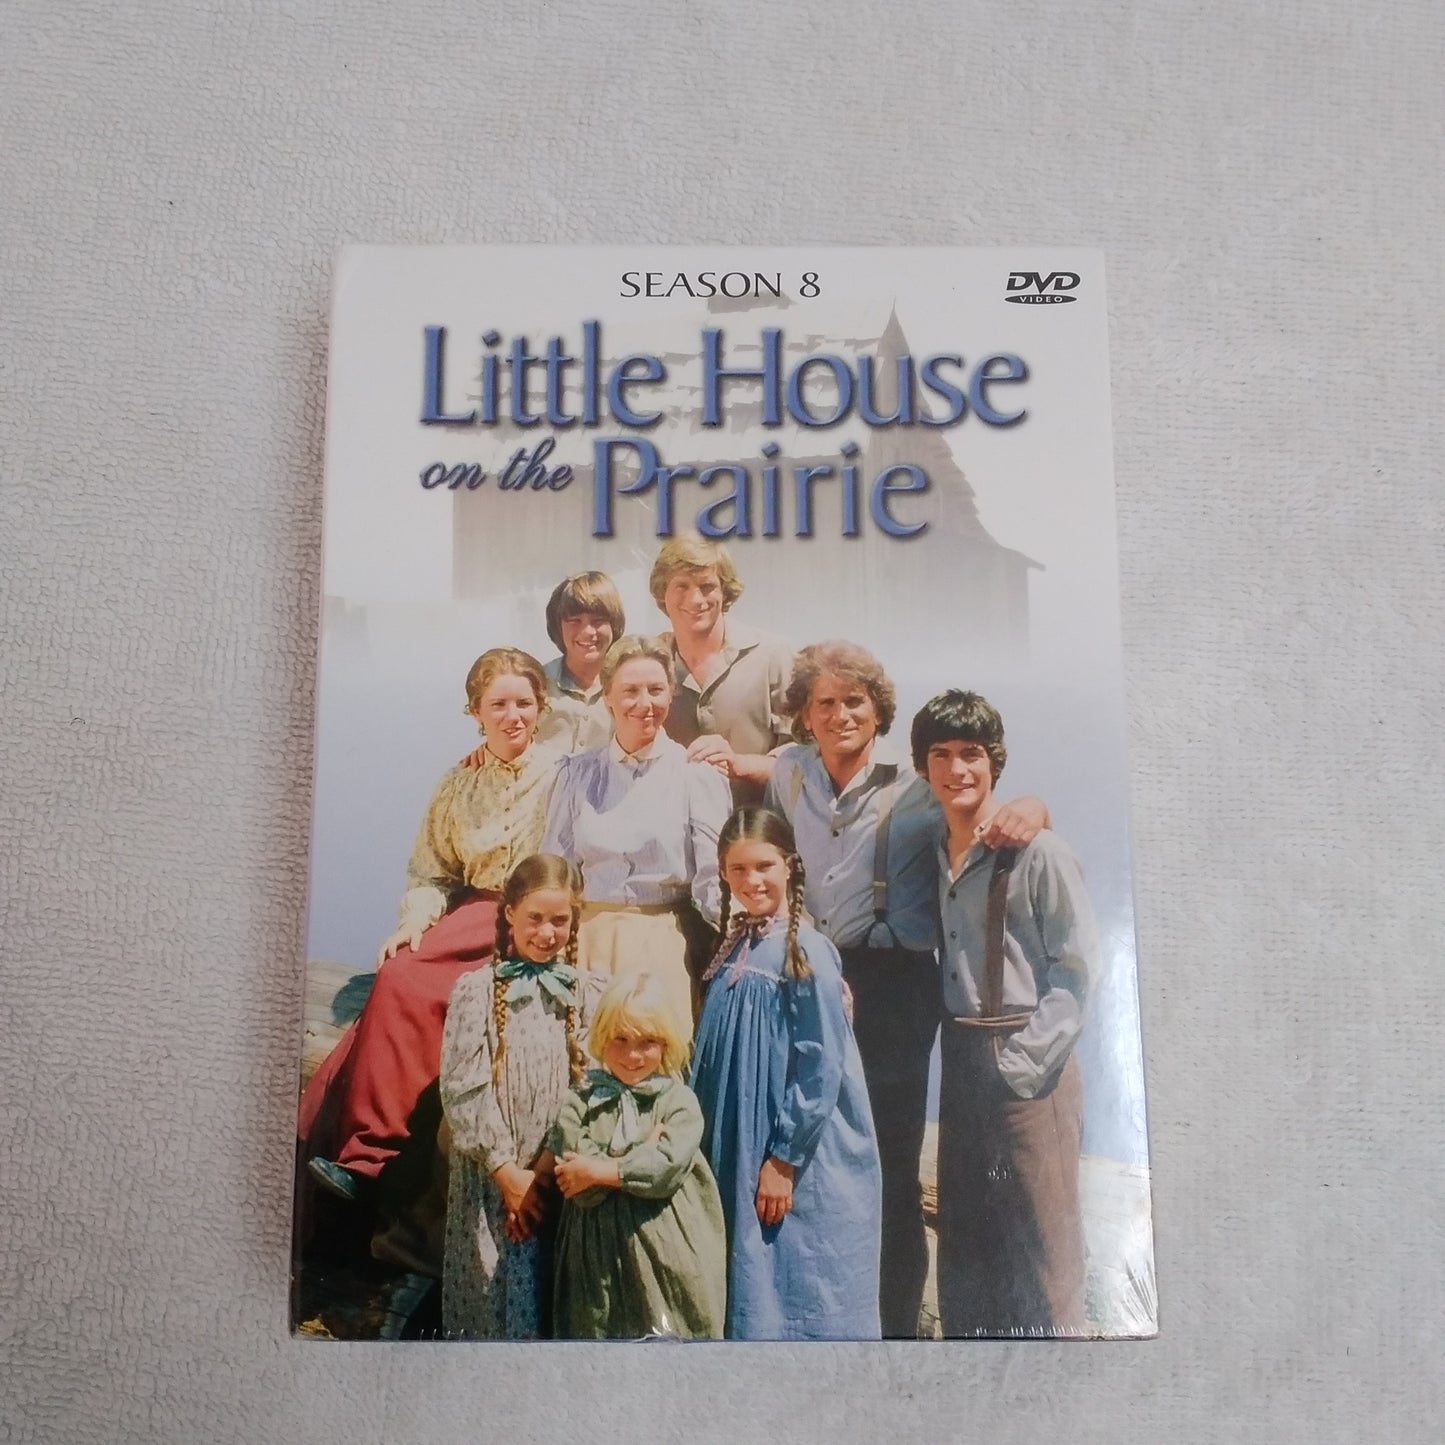 UNOPENED -- Little House on the Prairie, Season 8, Remastered Collector's Edition DVD Set